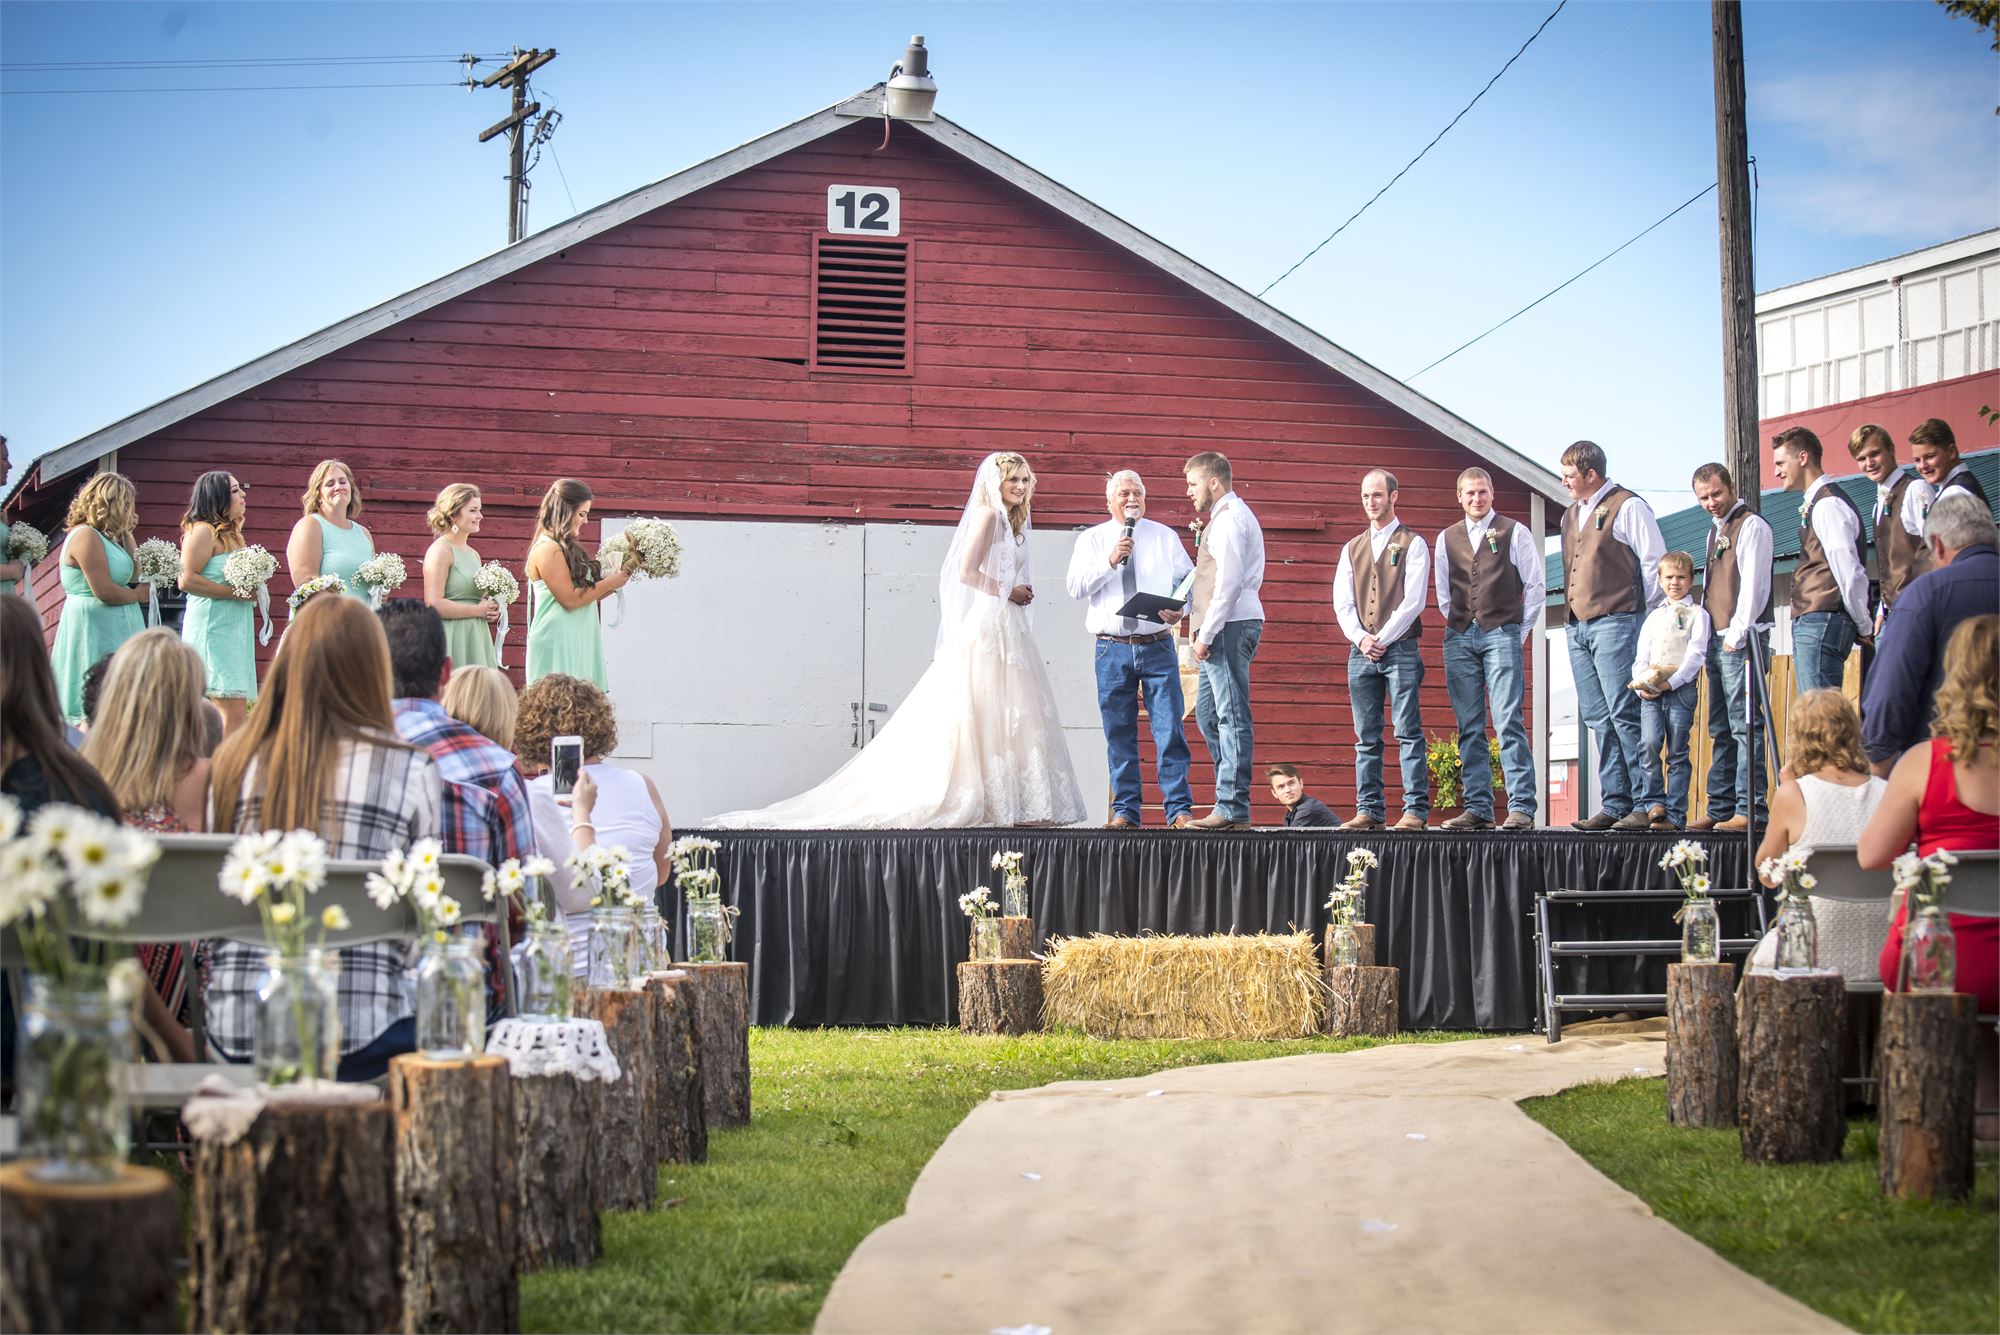 Weddings at the Fairgrounds